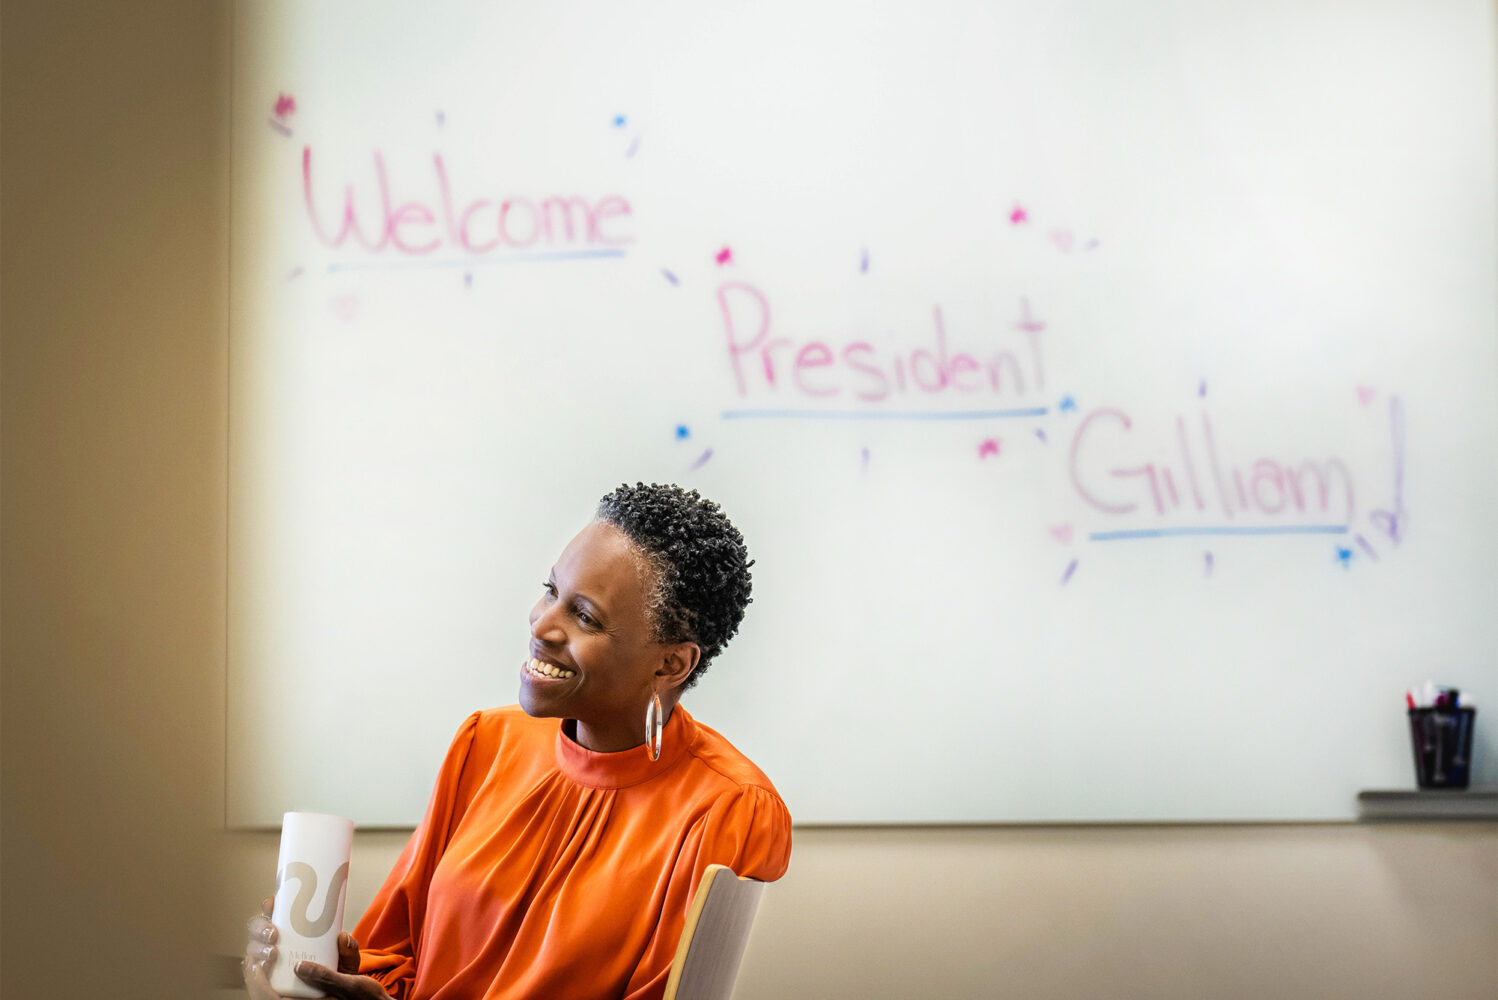 Photo: President Melissa Gilliam sits underneath a whiteboard with a handwritten note reading "Welcome President Gilliam"